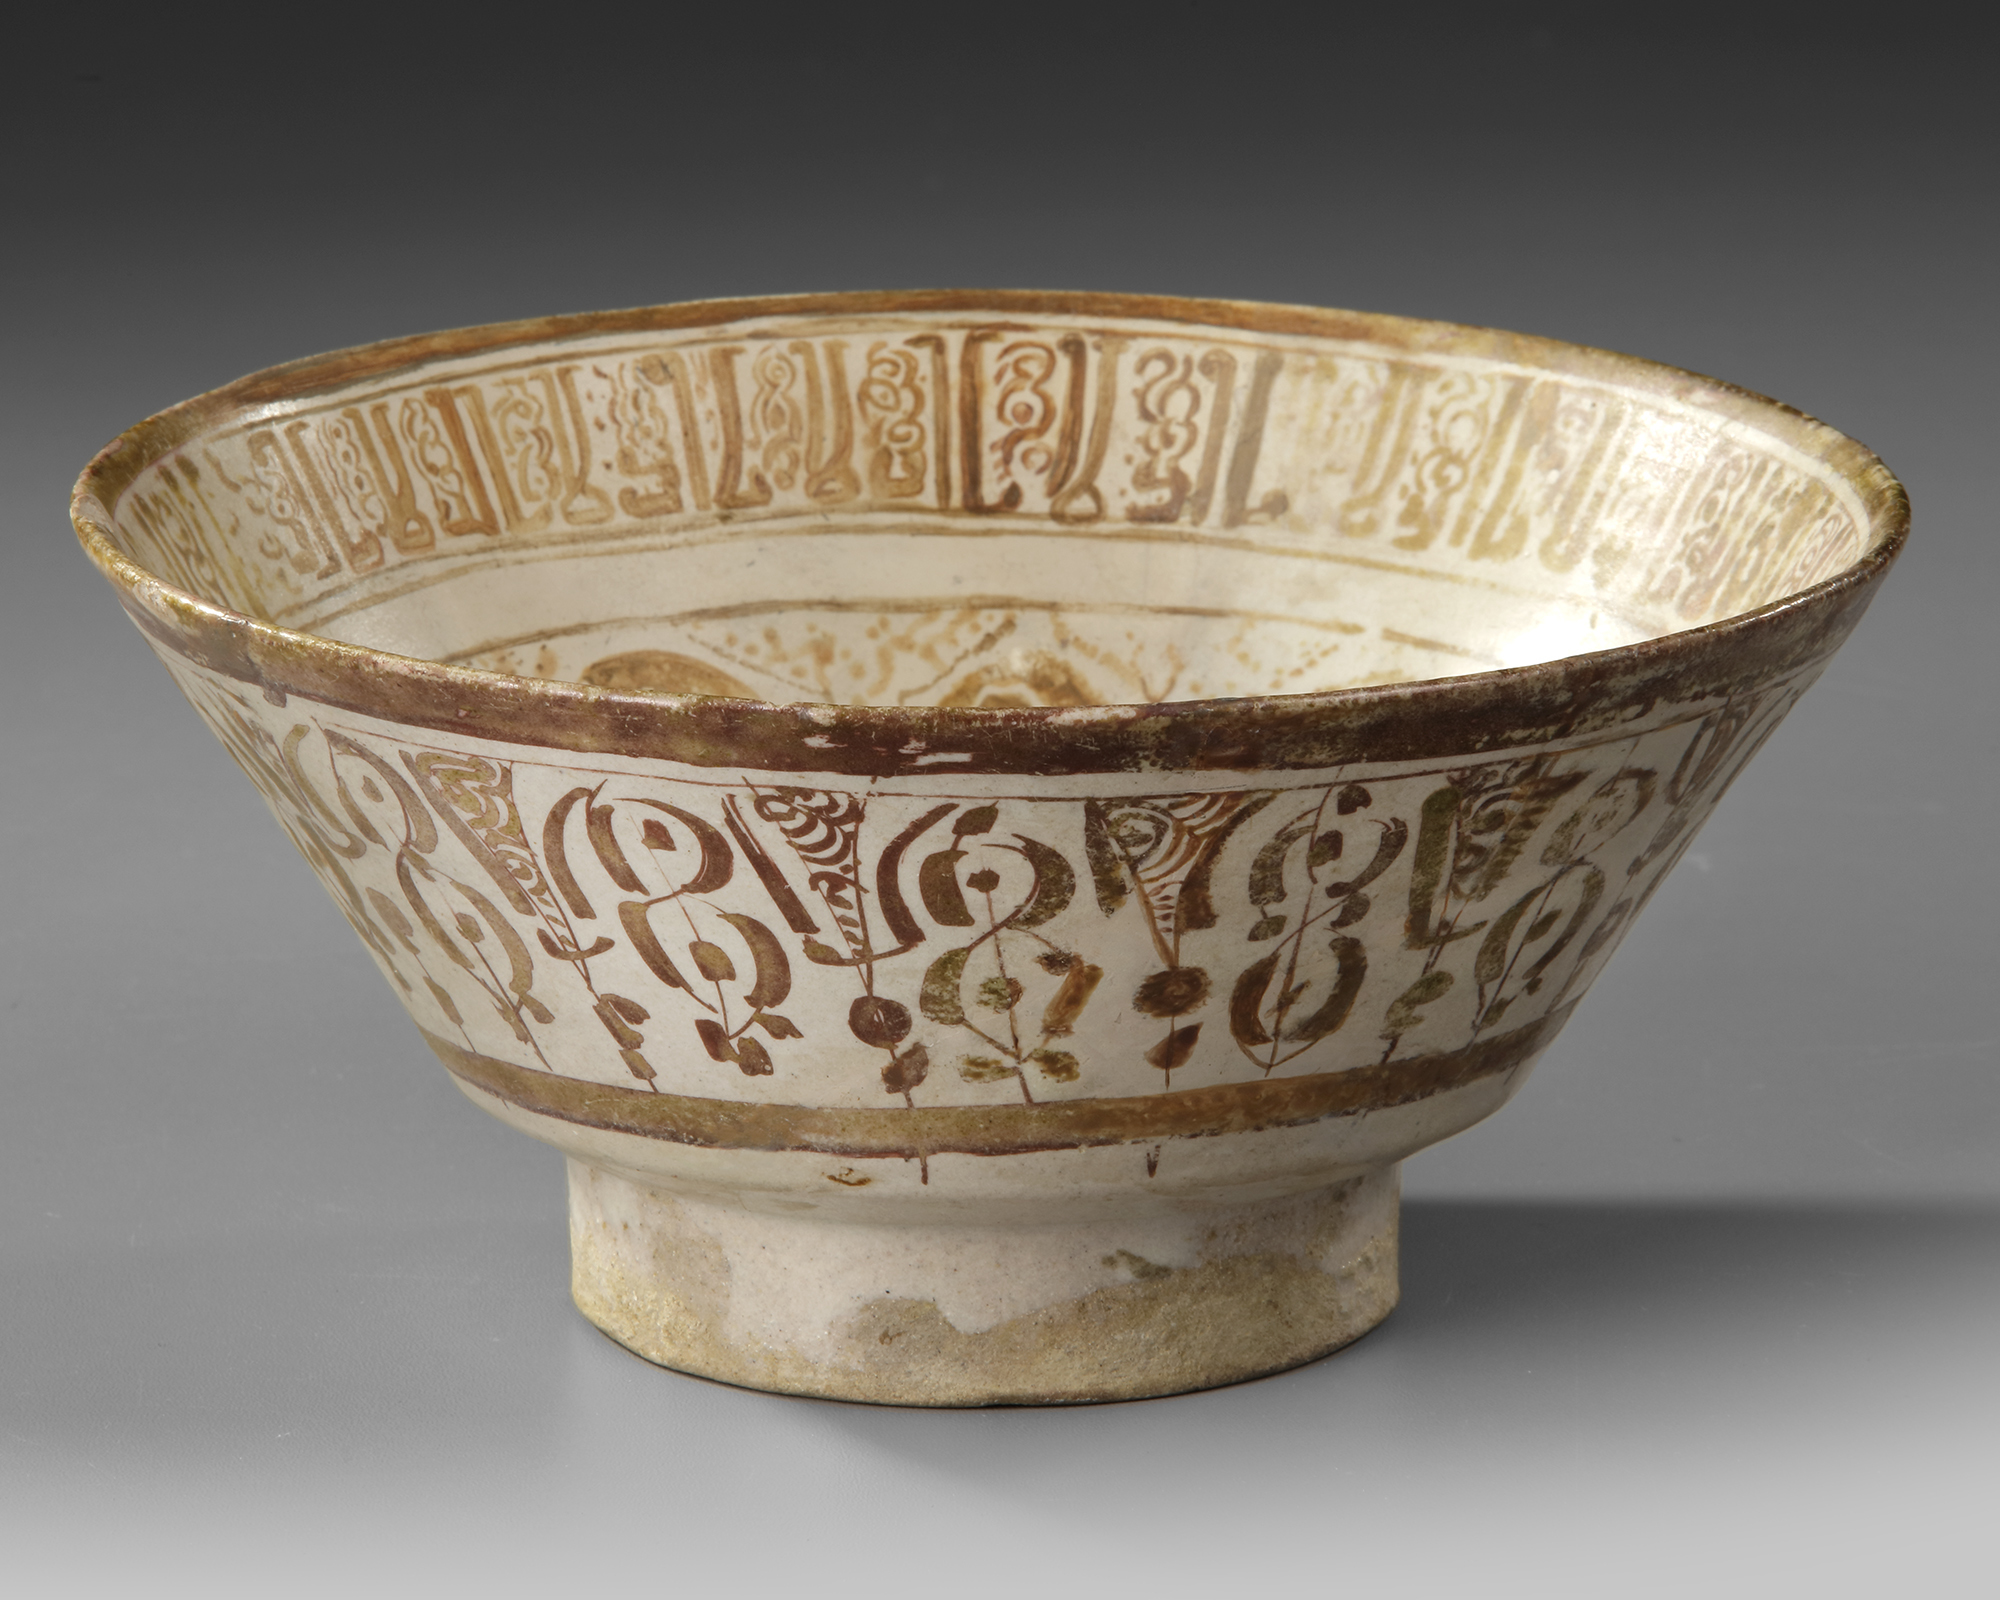 A Kashan Pottery Bowl Central Persia 12th 13th Century